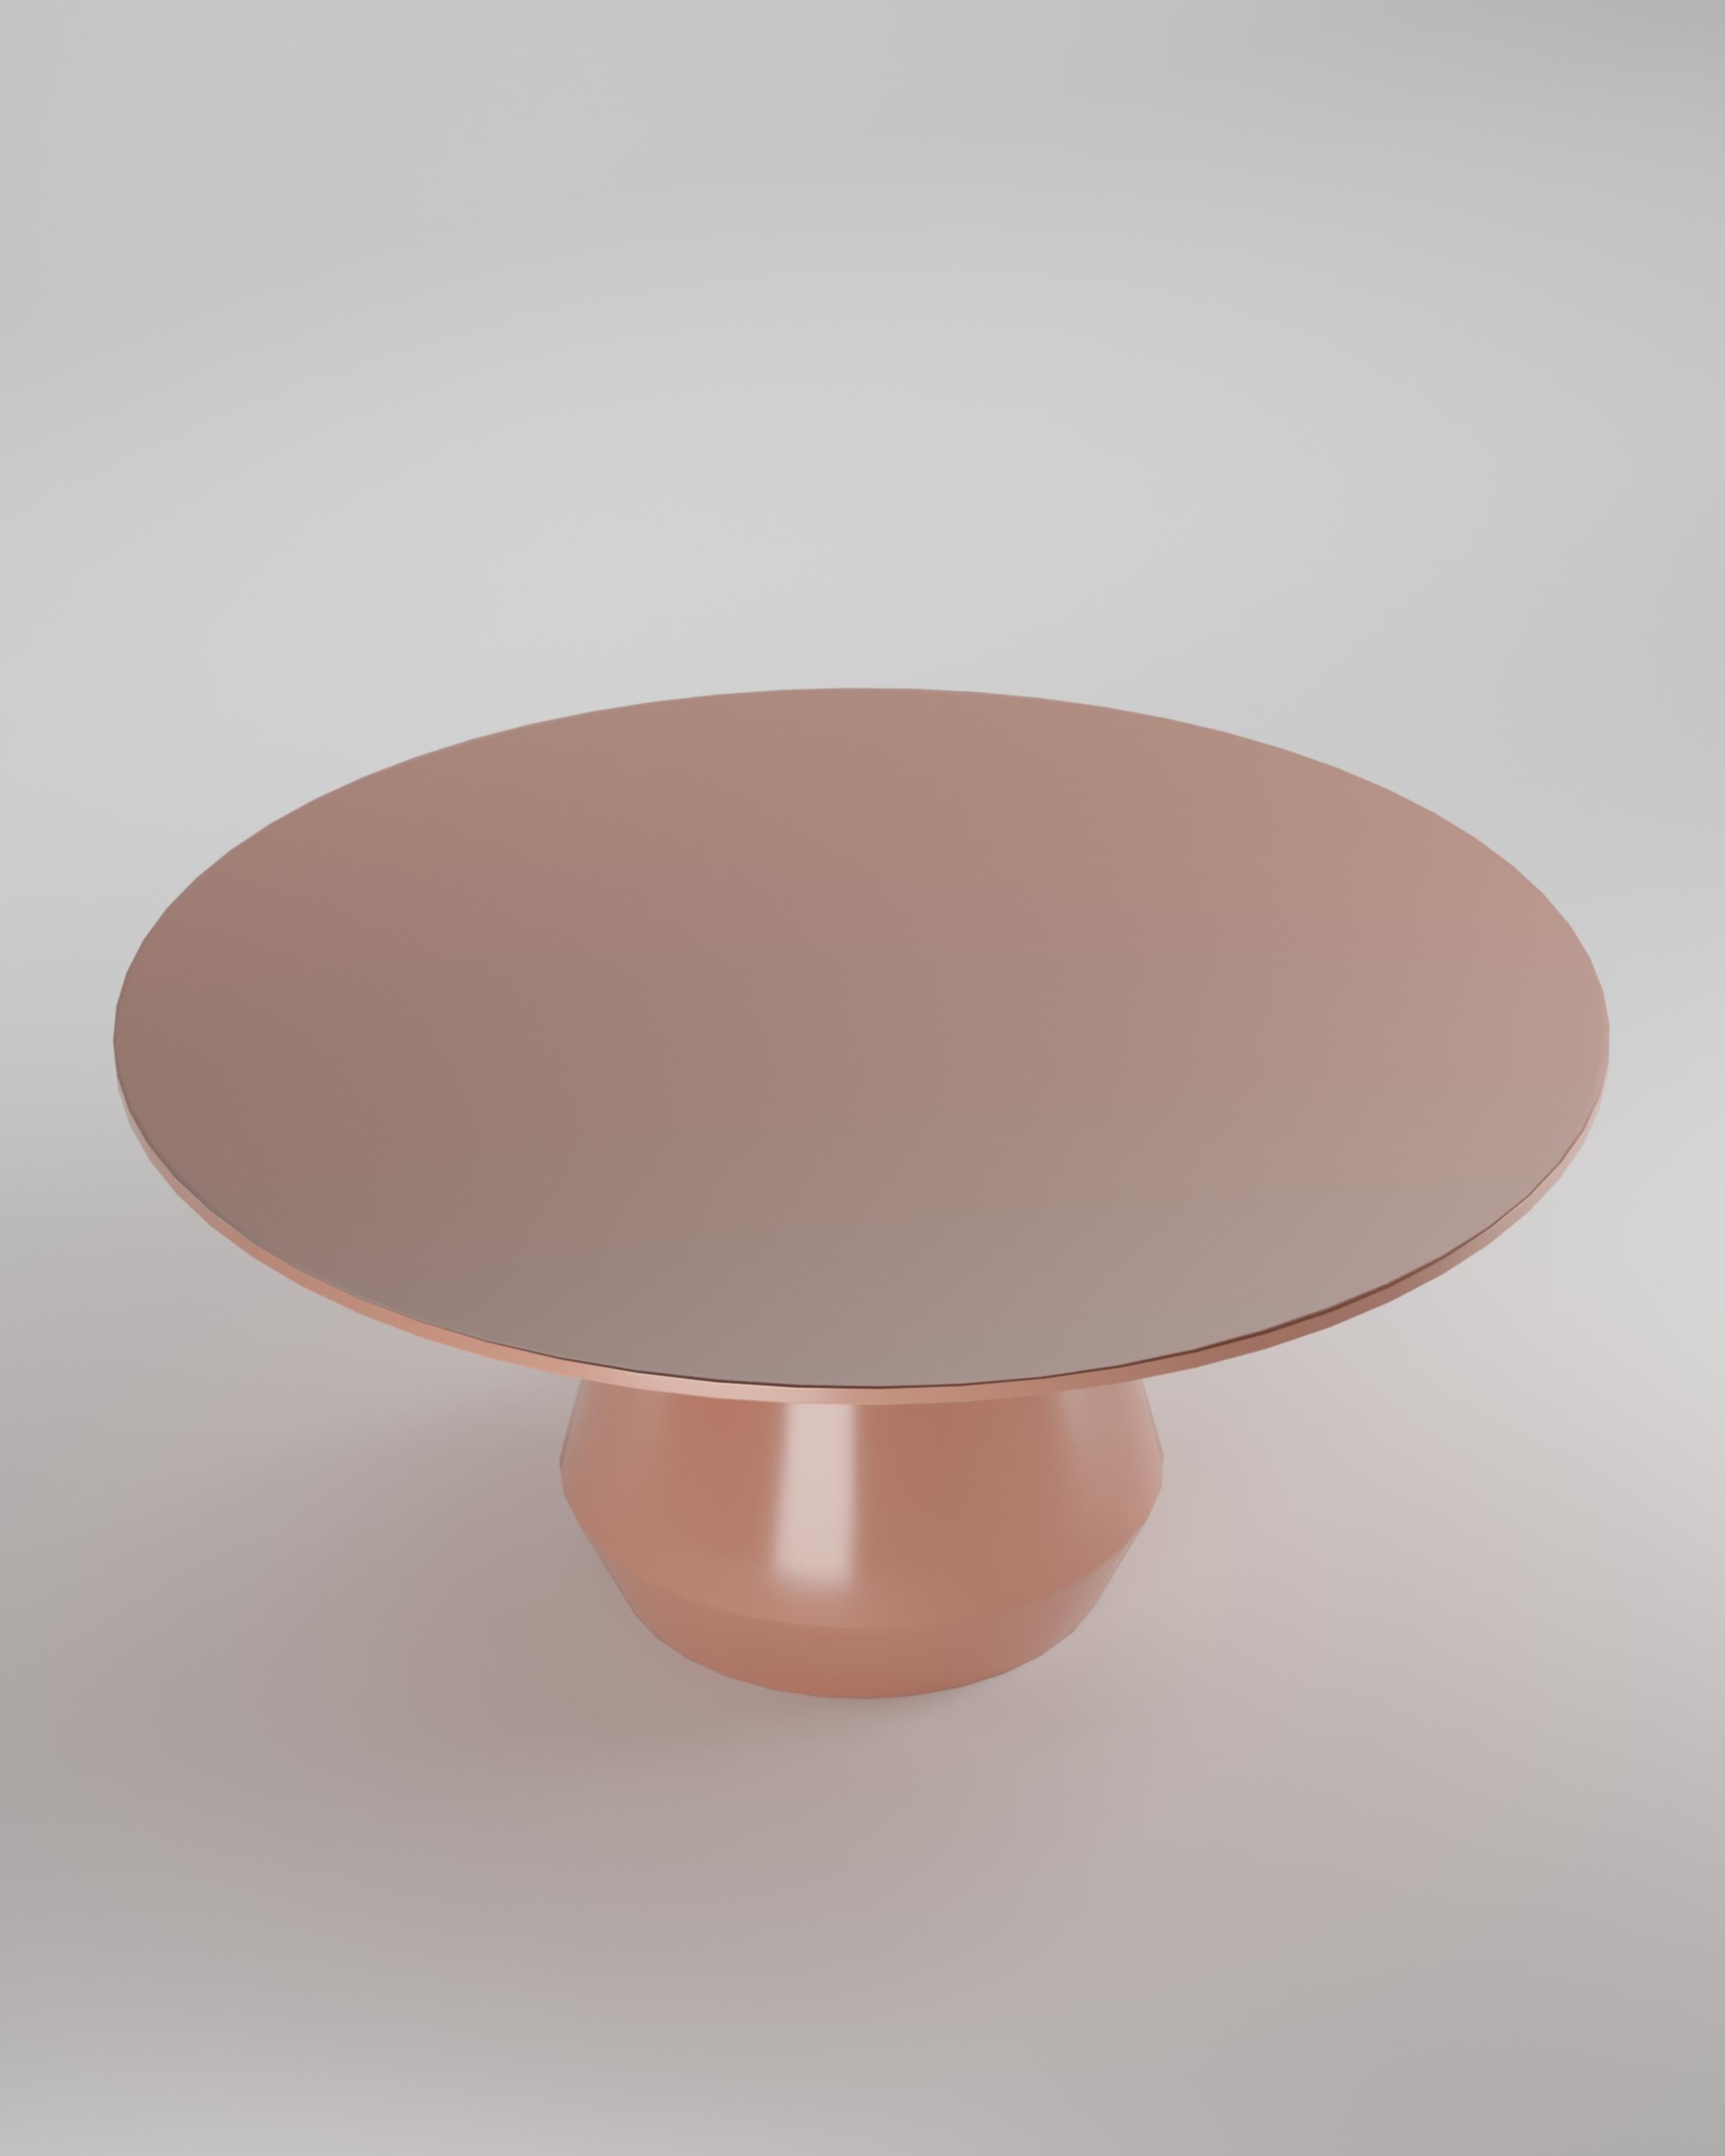 Portuguese Contemporary Modern Charlotte Dining Table in Lacquer in Pink by Collector For Sale